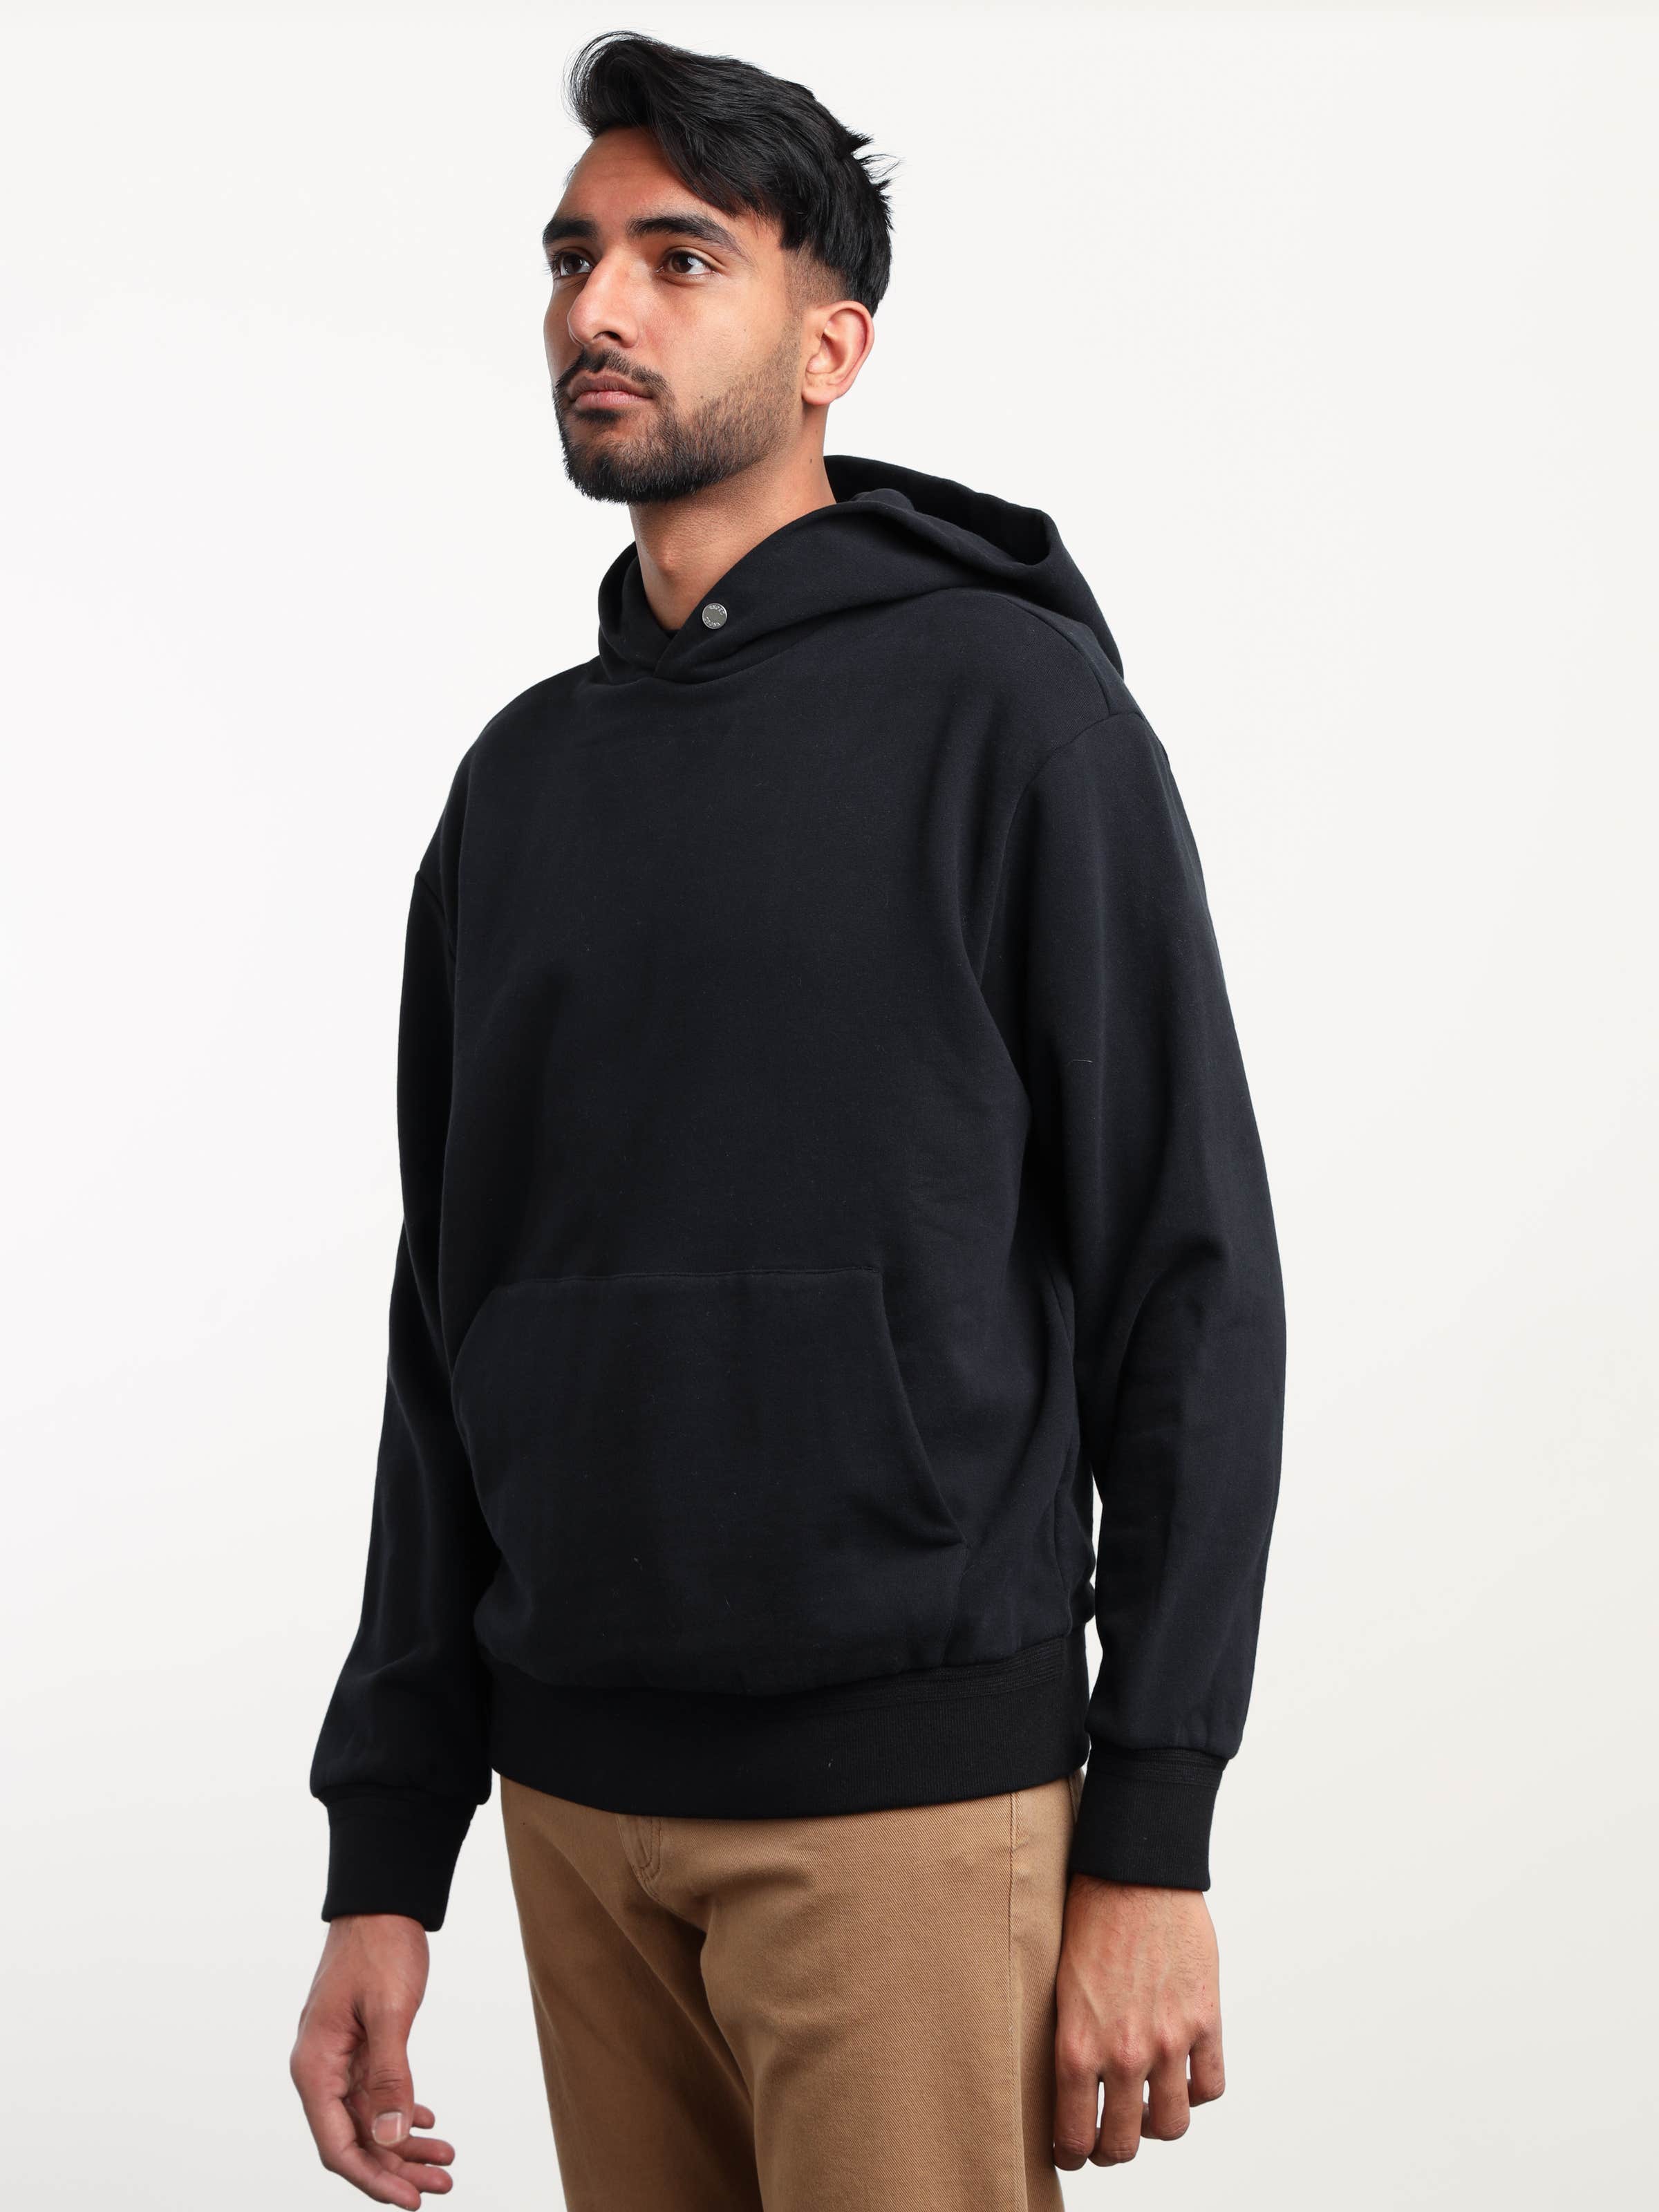 Black Hoodie with Snap Button